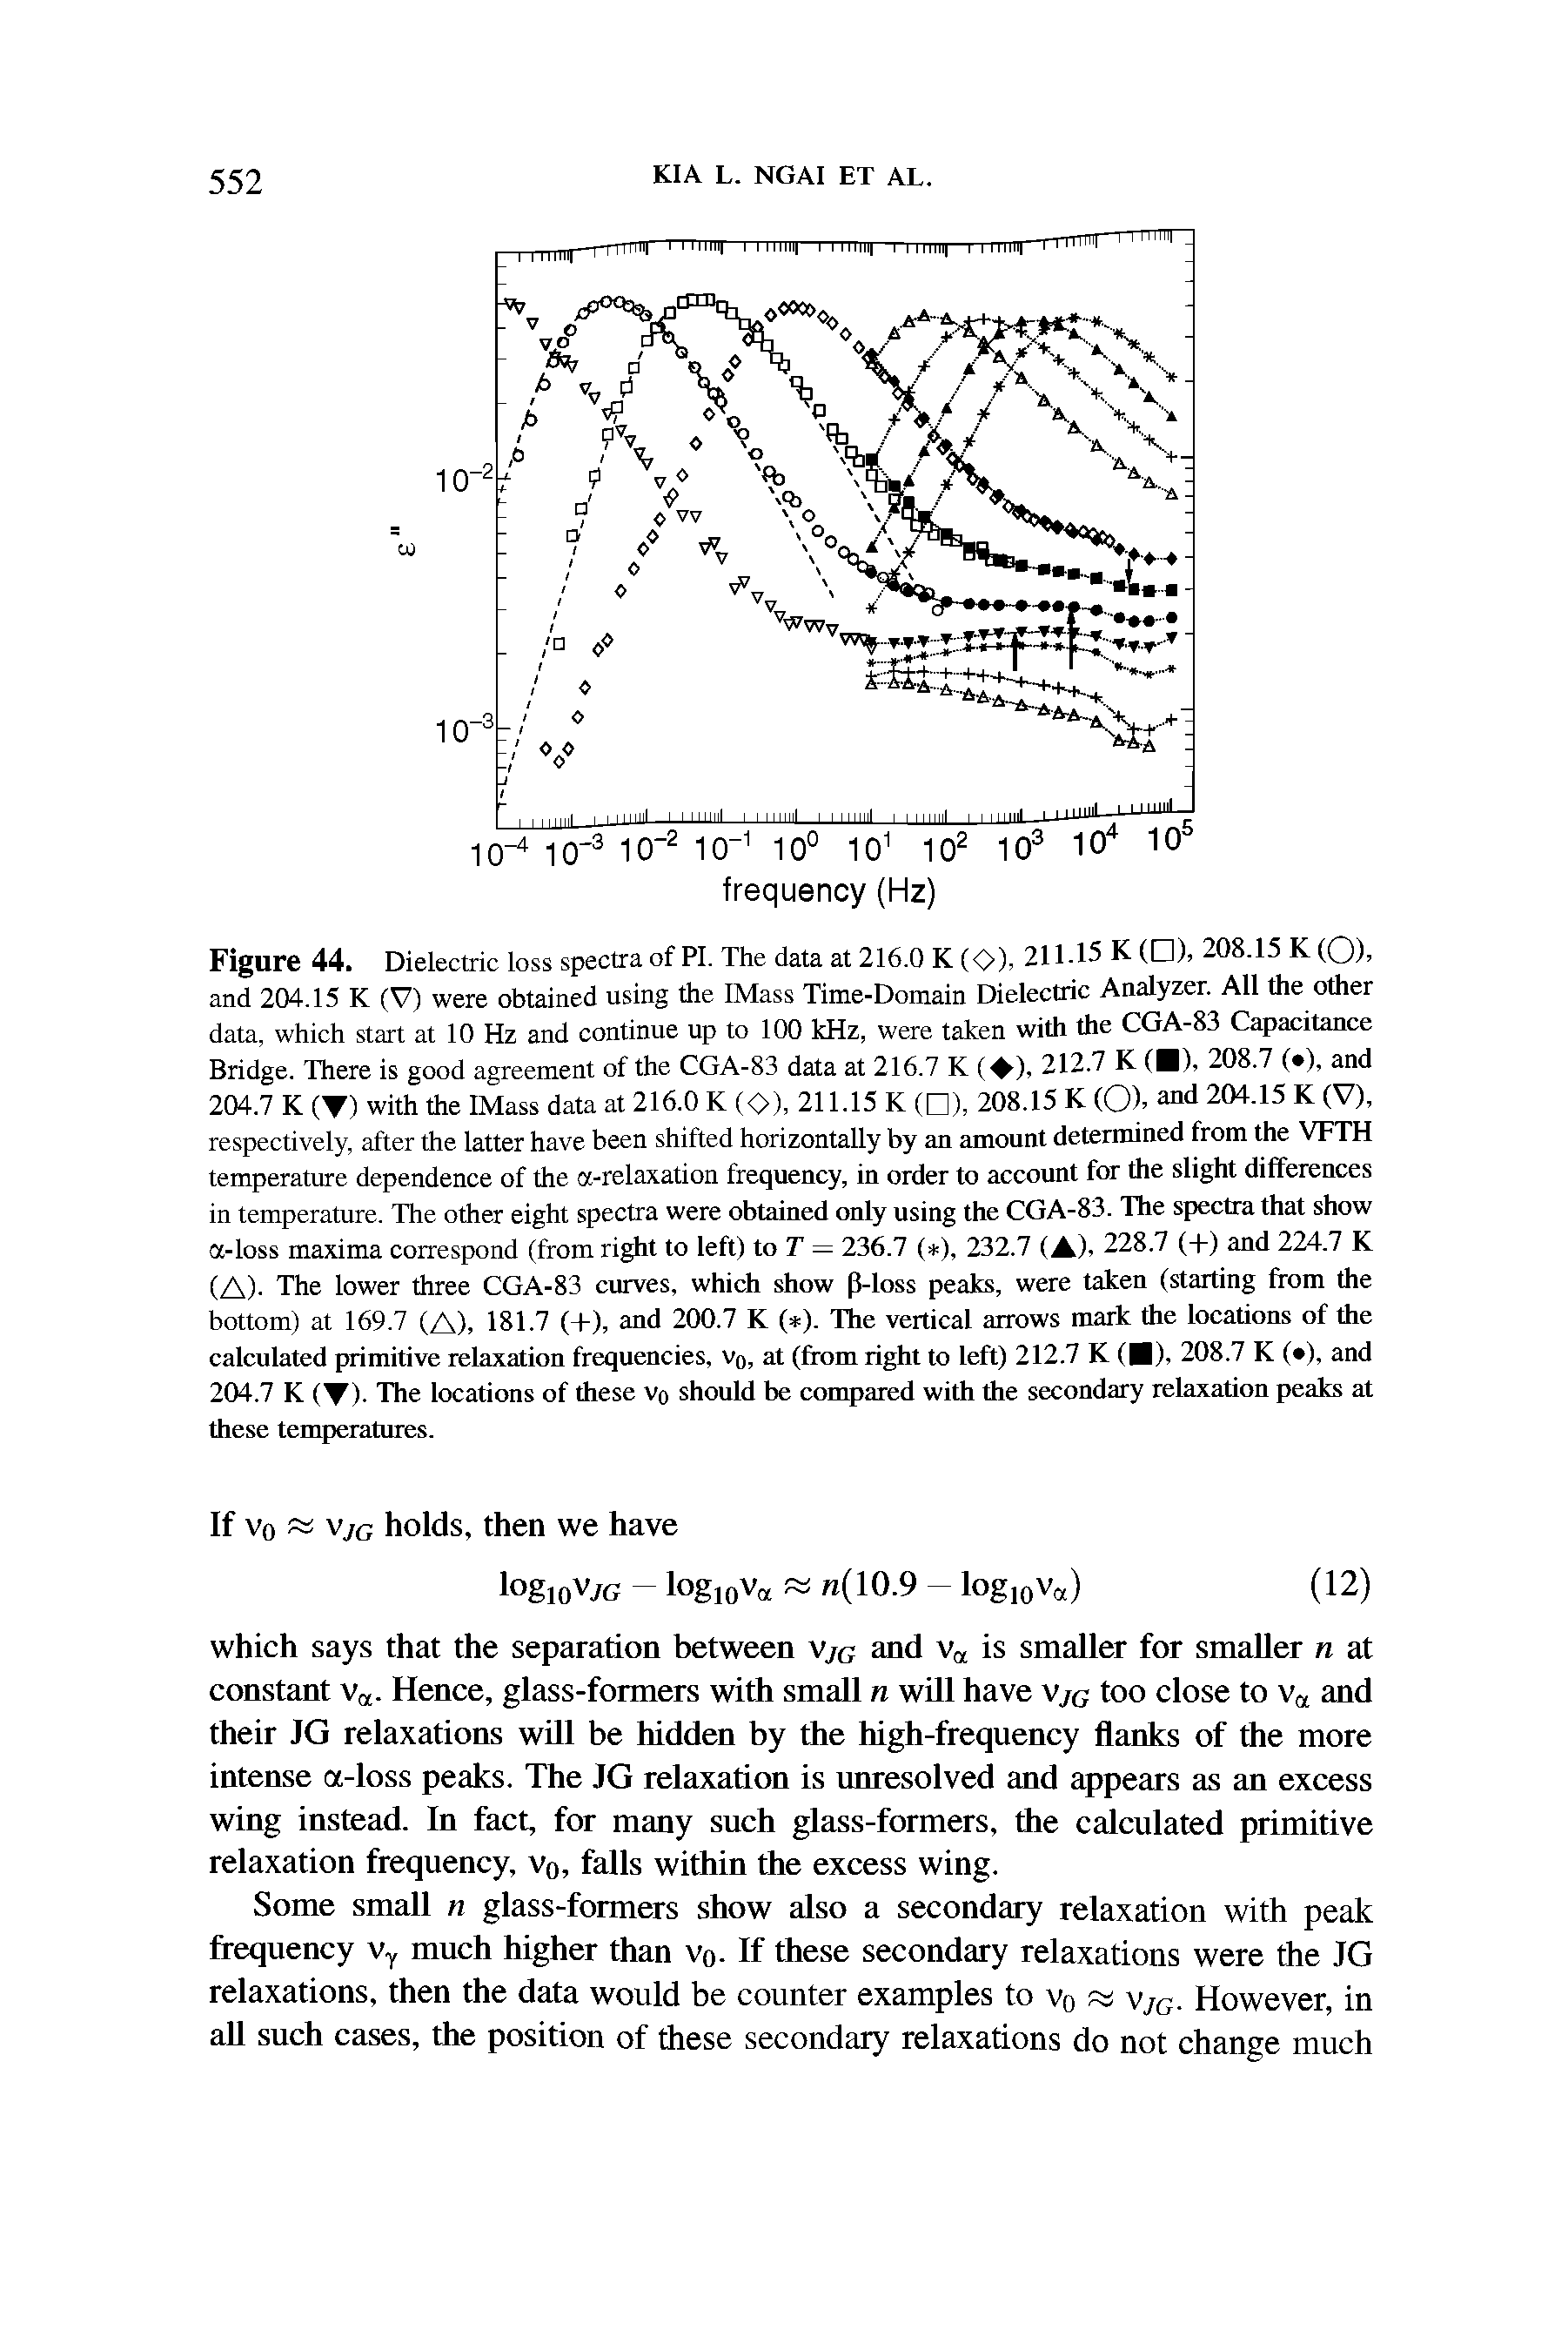 Figure 44. Dielectric loss spectra of PI. The data at 216.0 K (OX 211-15 K ( ), 208.15 K(OX and 204.15 K (V) were obtained using the IMass Time-Domain Dielectric Analyzer. All the other data, which start at 10 Hz and continue up to 100 kHz, were taken with the CGA-83 Capacitance Bridge. There is good agreement of the CGA-83 data at 216.7 K ( ), 212.7 K (I), 208.7 ( ), and...